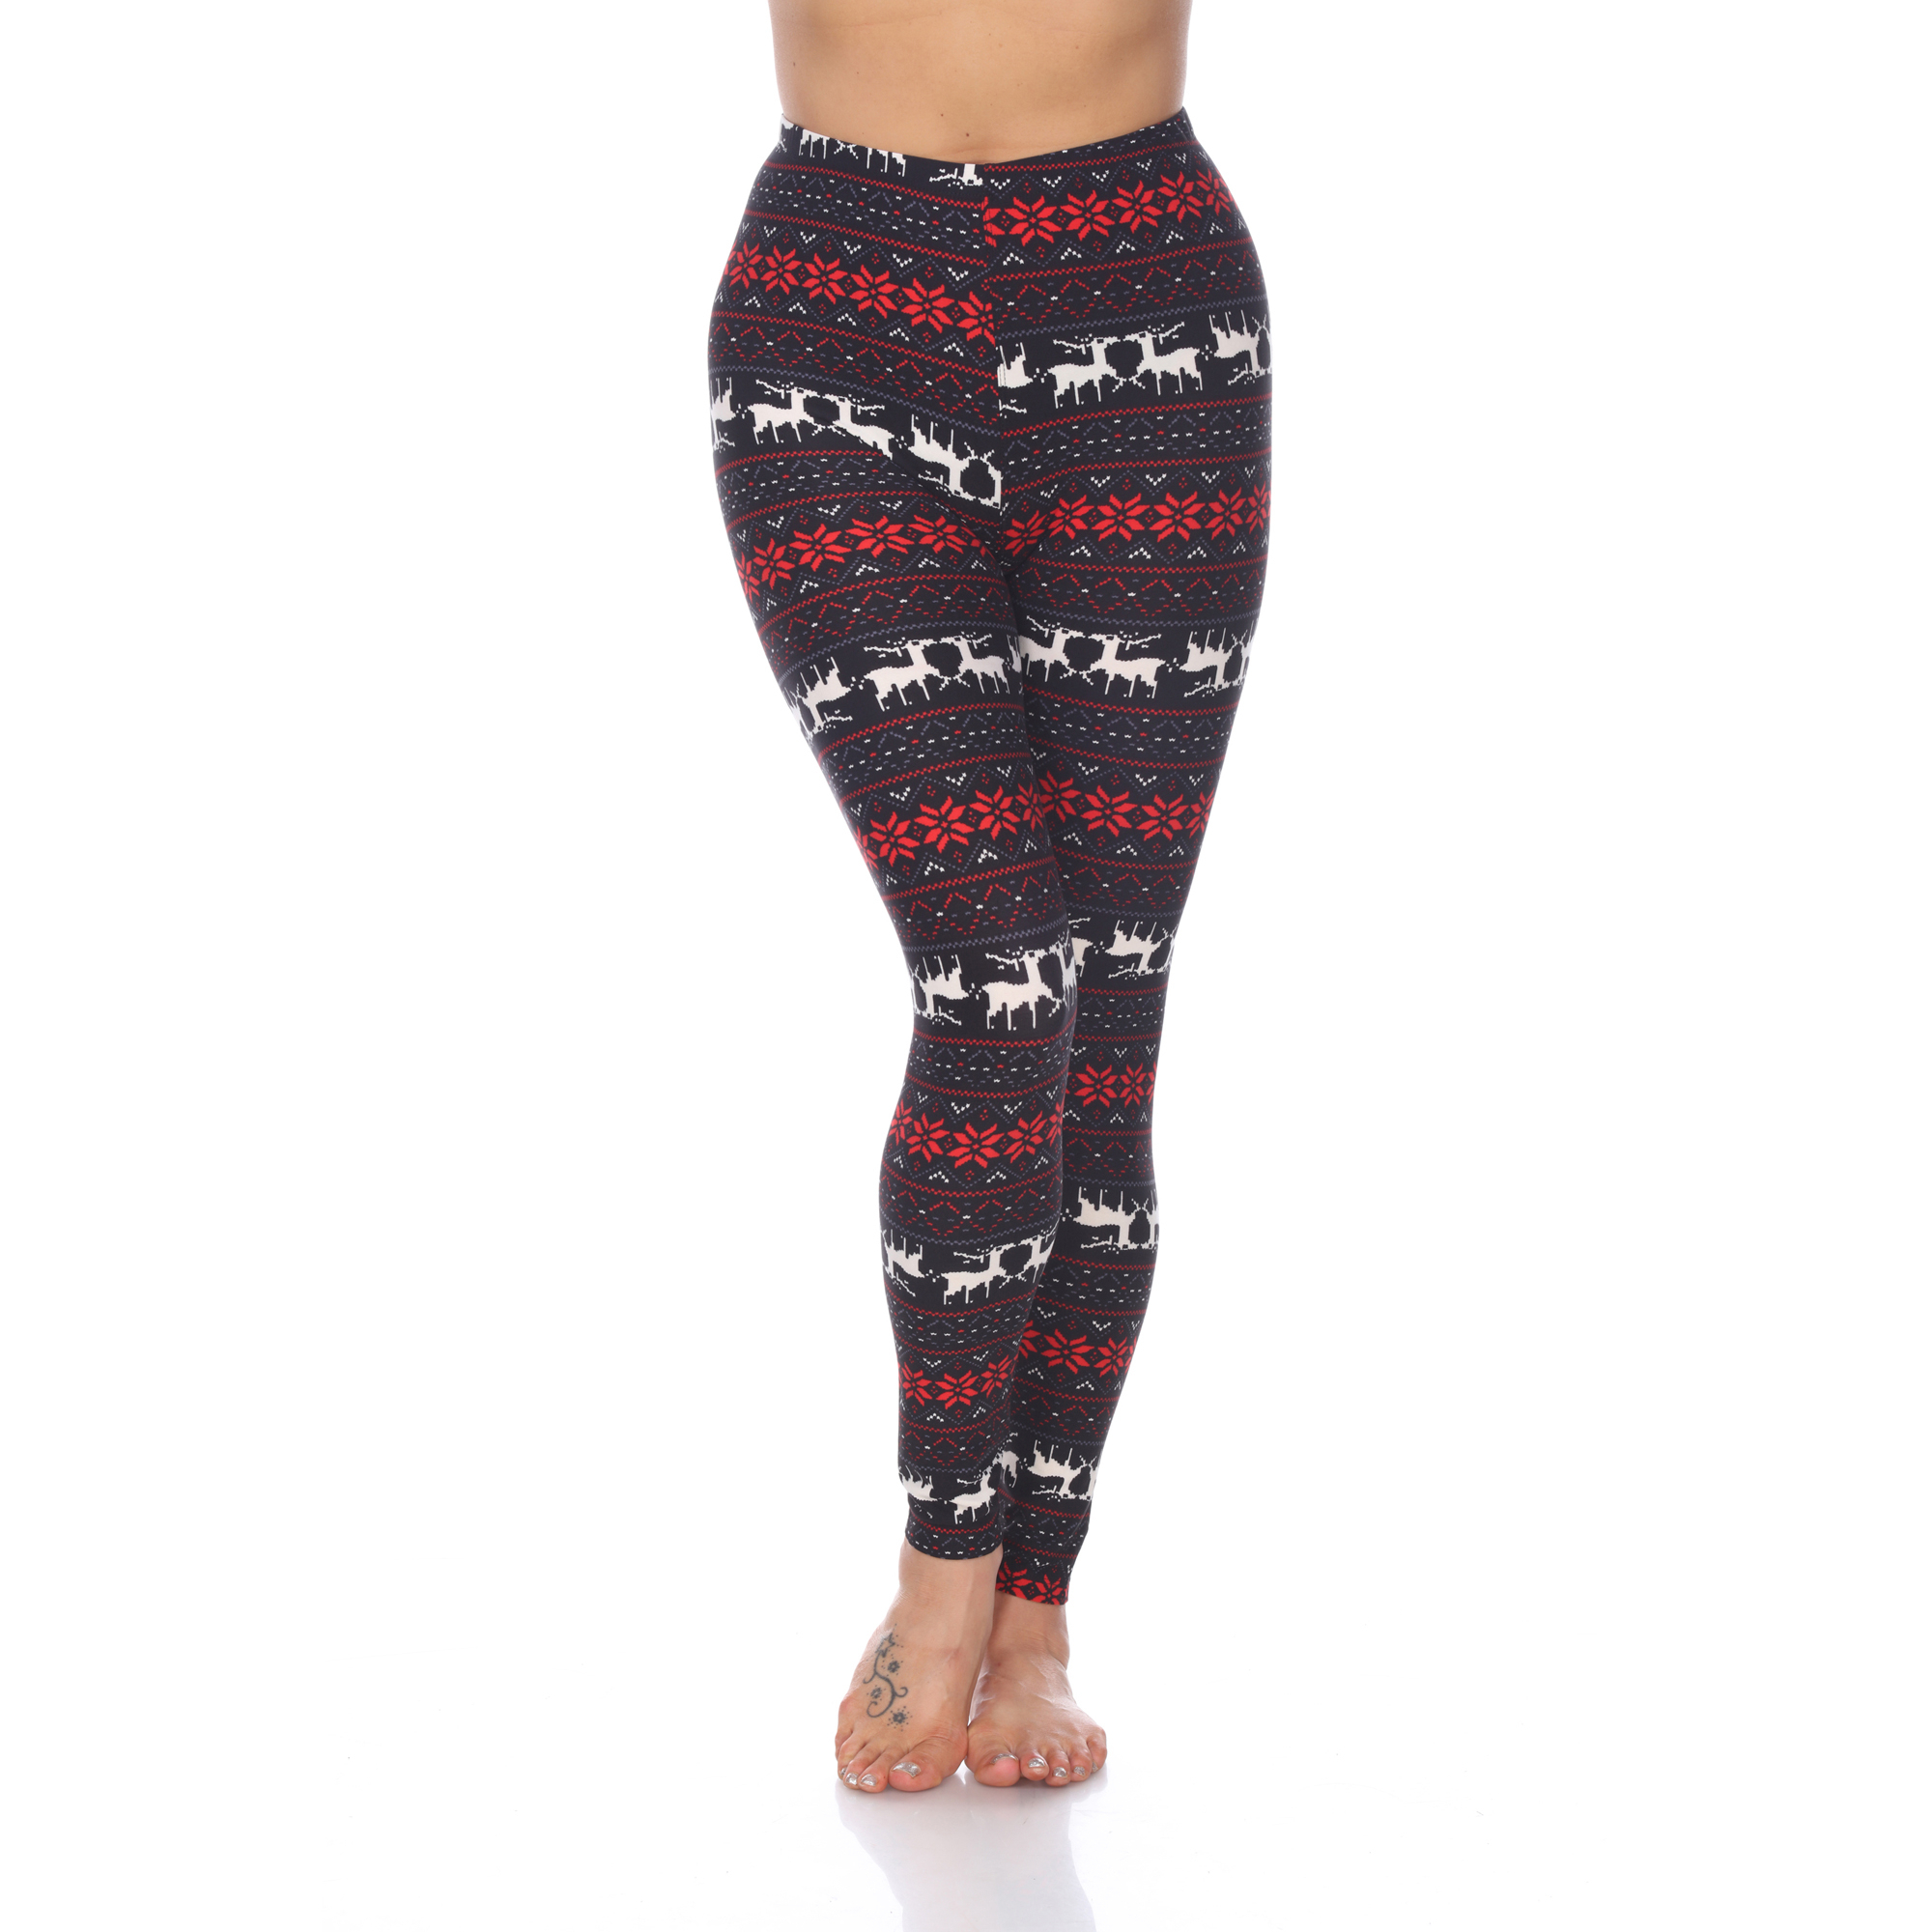 White Mark's Holiday Stretch Leggings - Black/Red, Plus Size